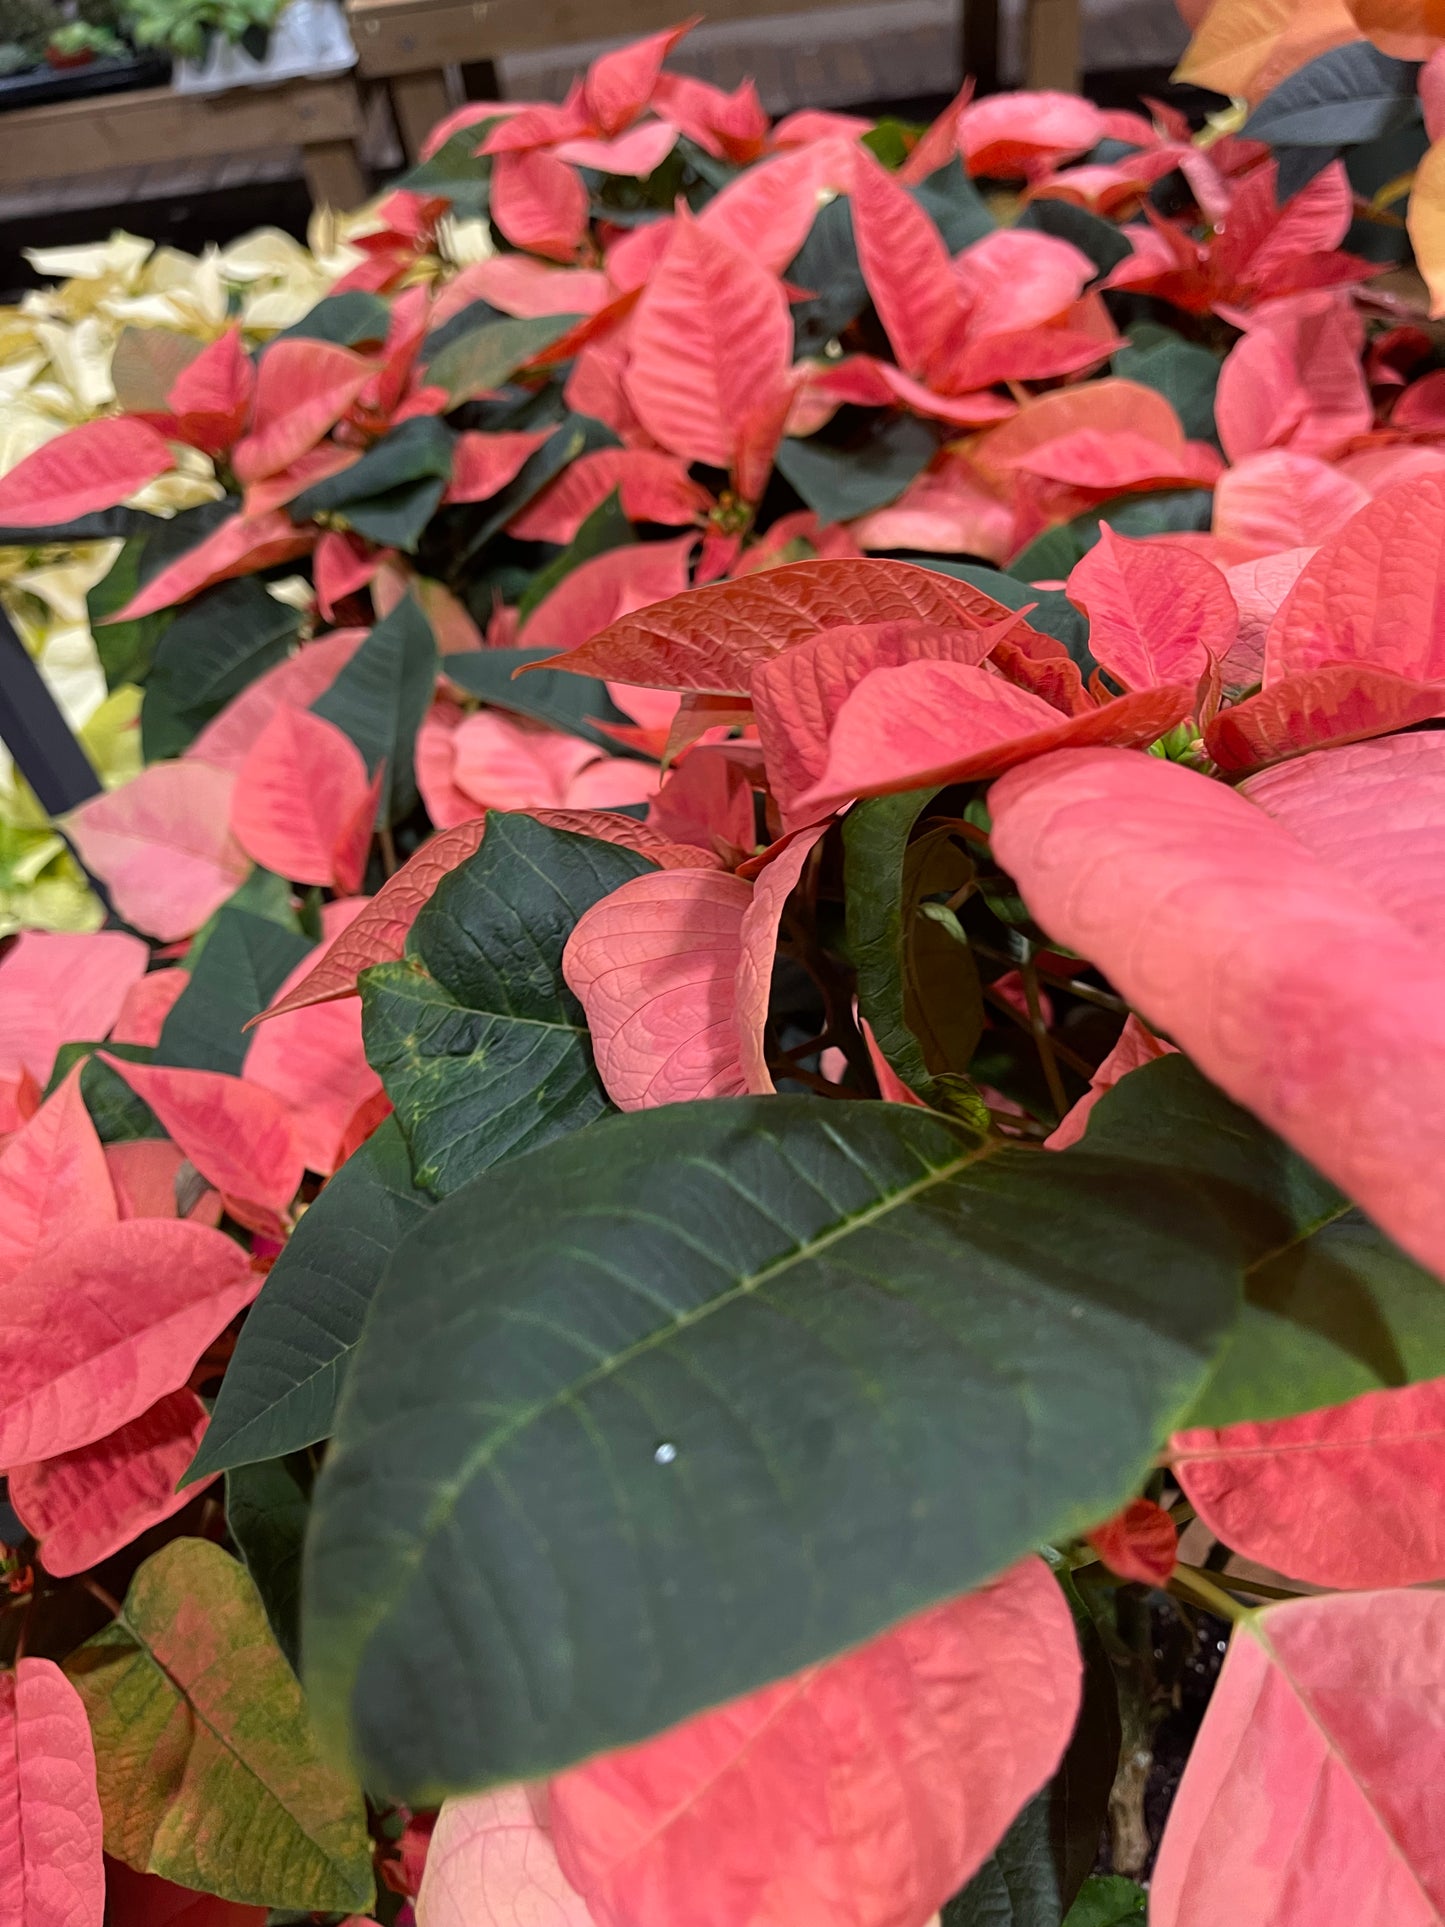 Poinsettiapot white/Red/brown/pink/